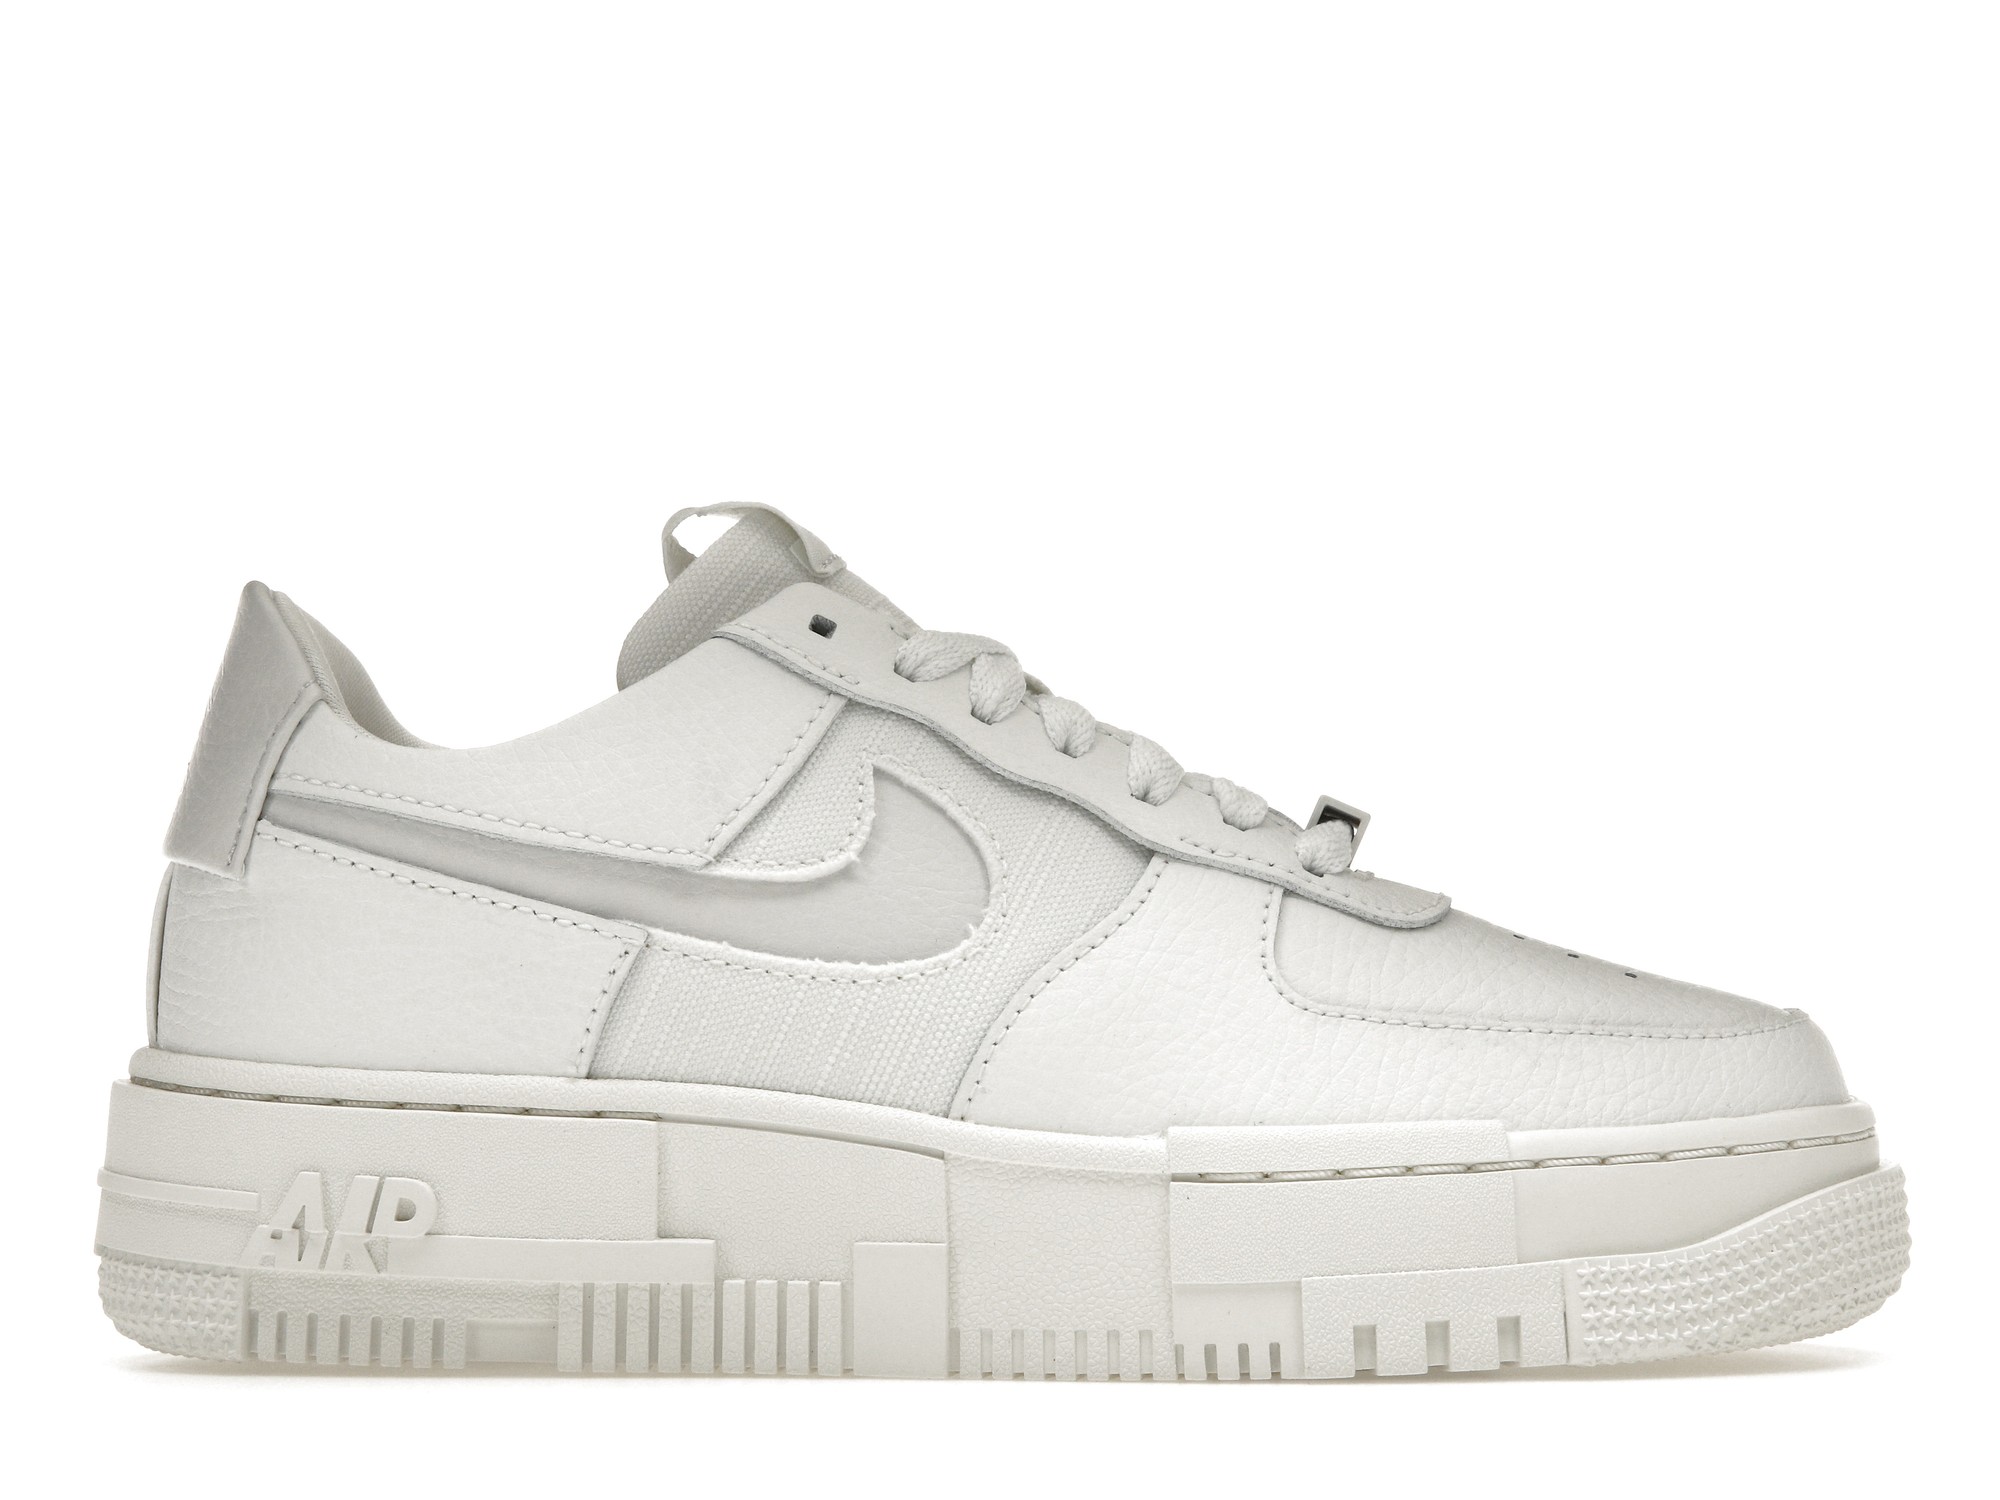 NIKE Air Force 1 Low Pixcel White